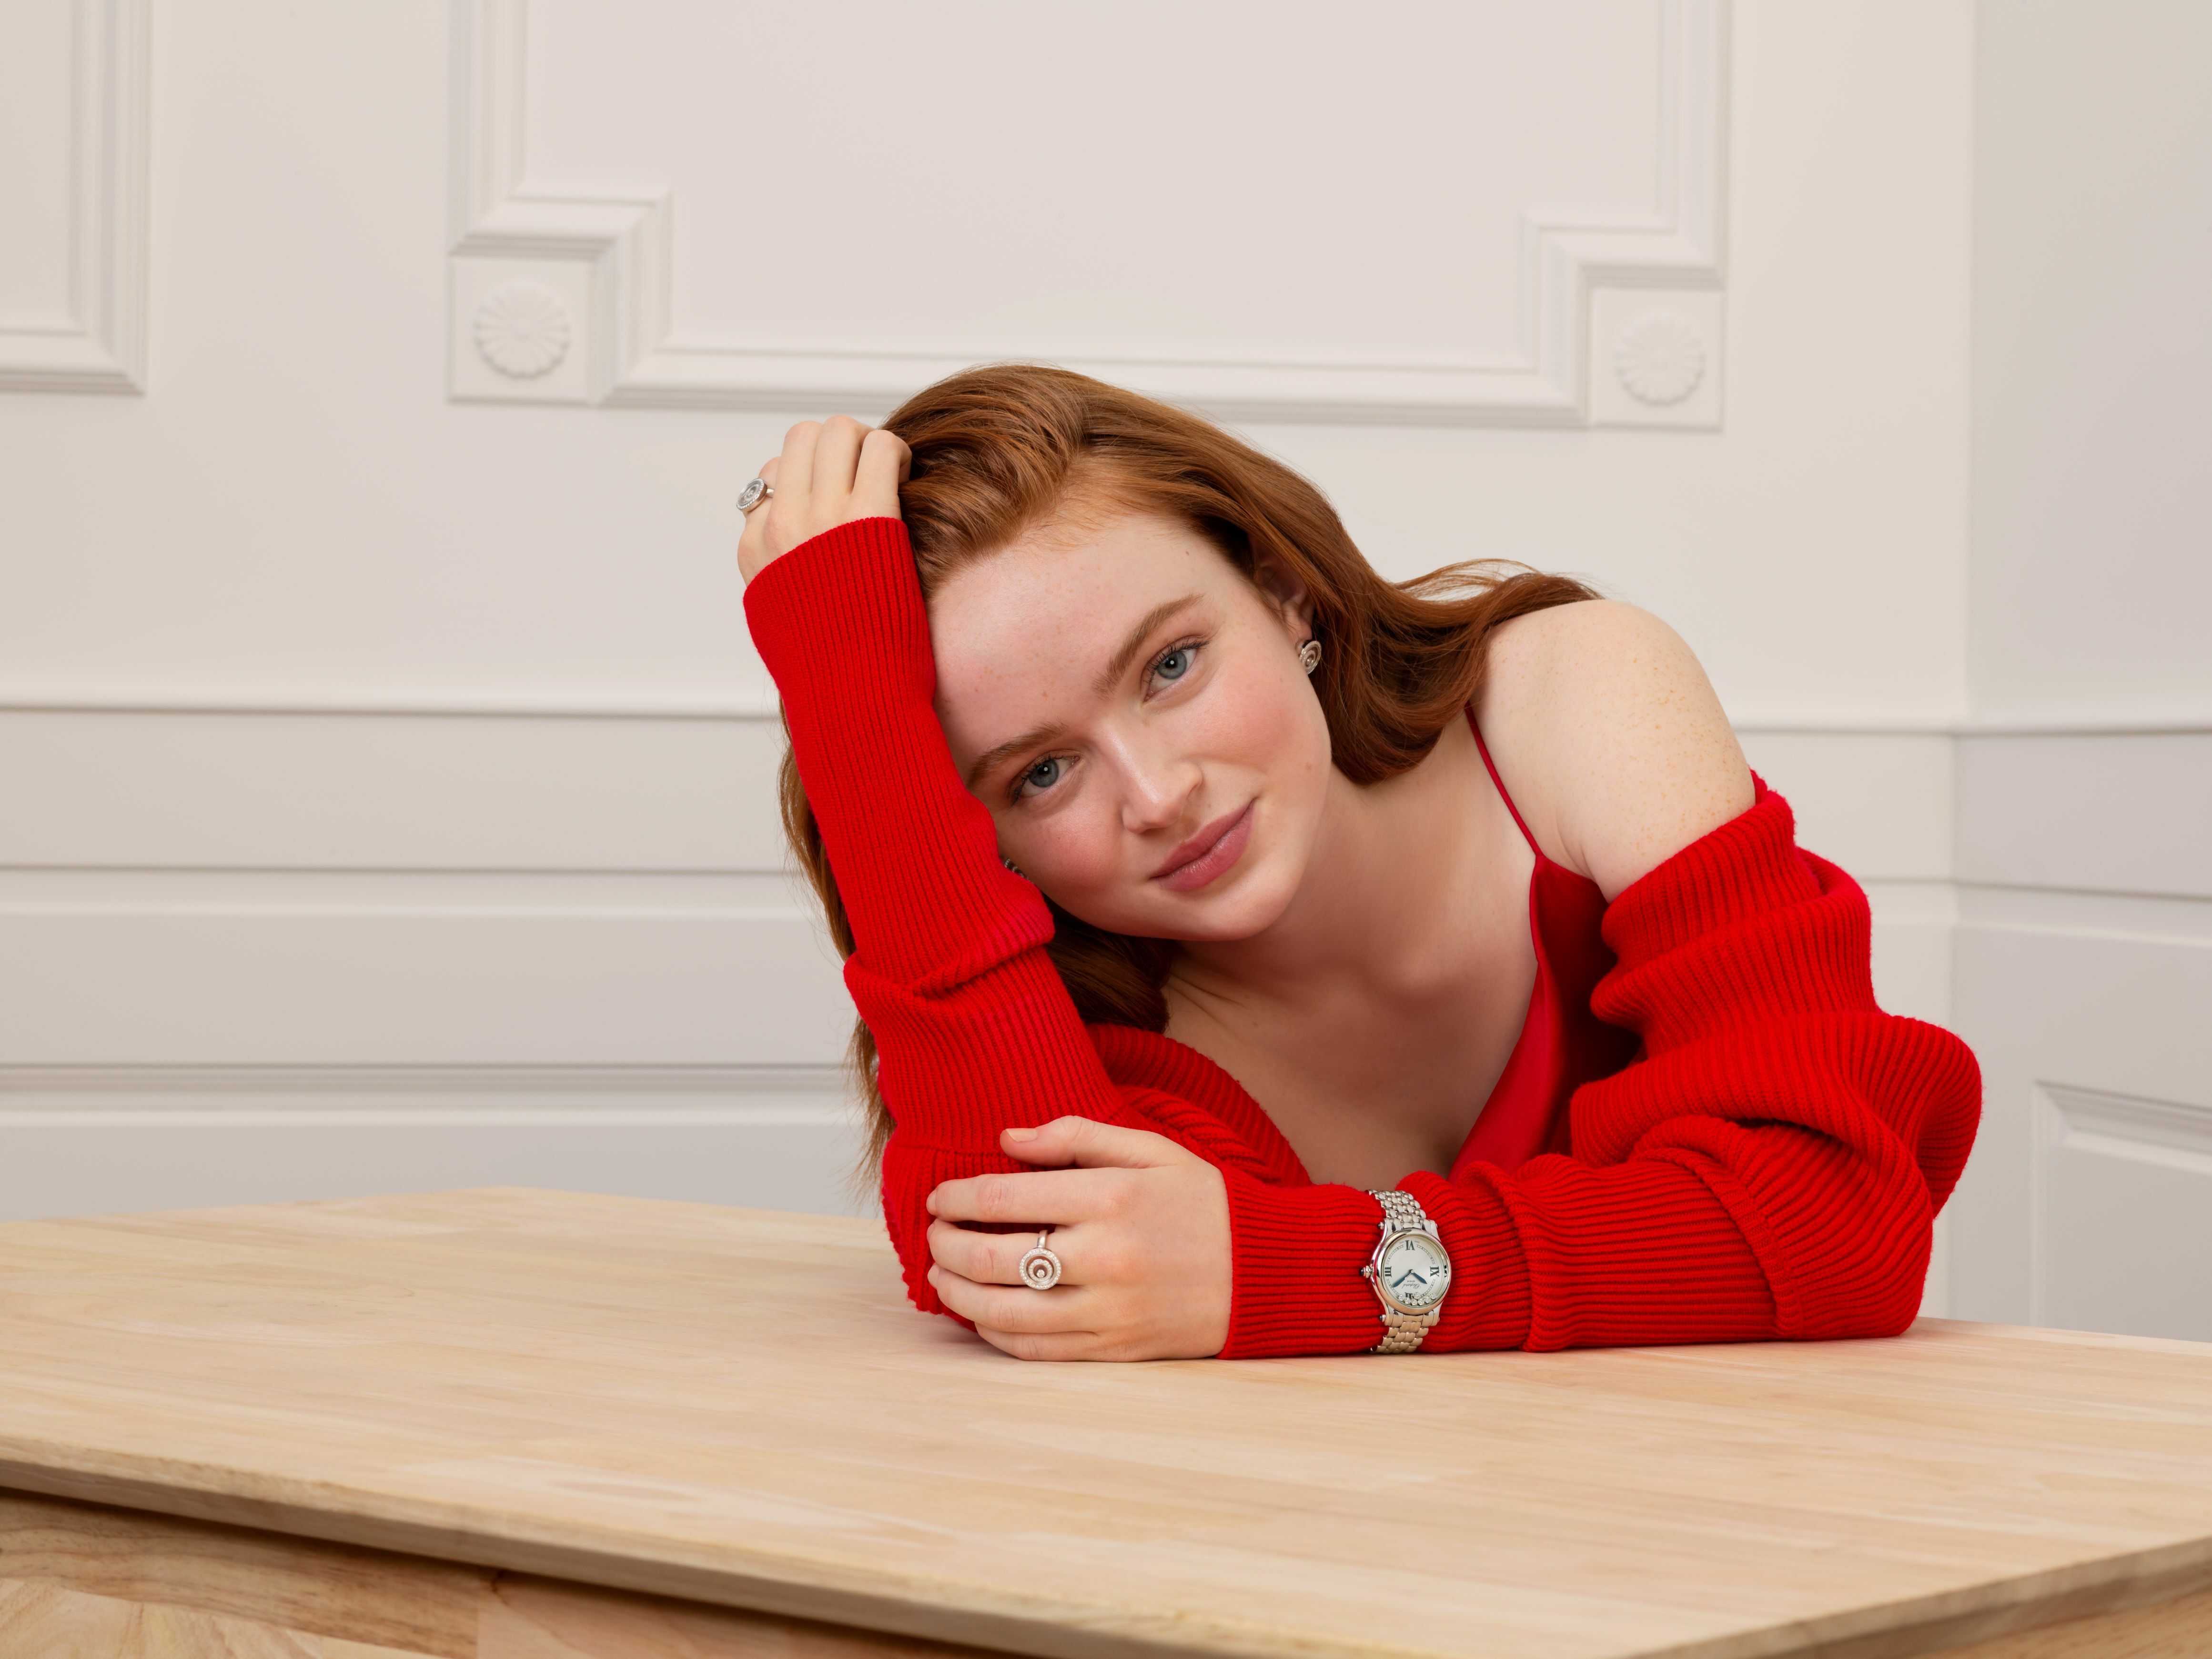 sadie sink, celebrity, redhead for android